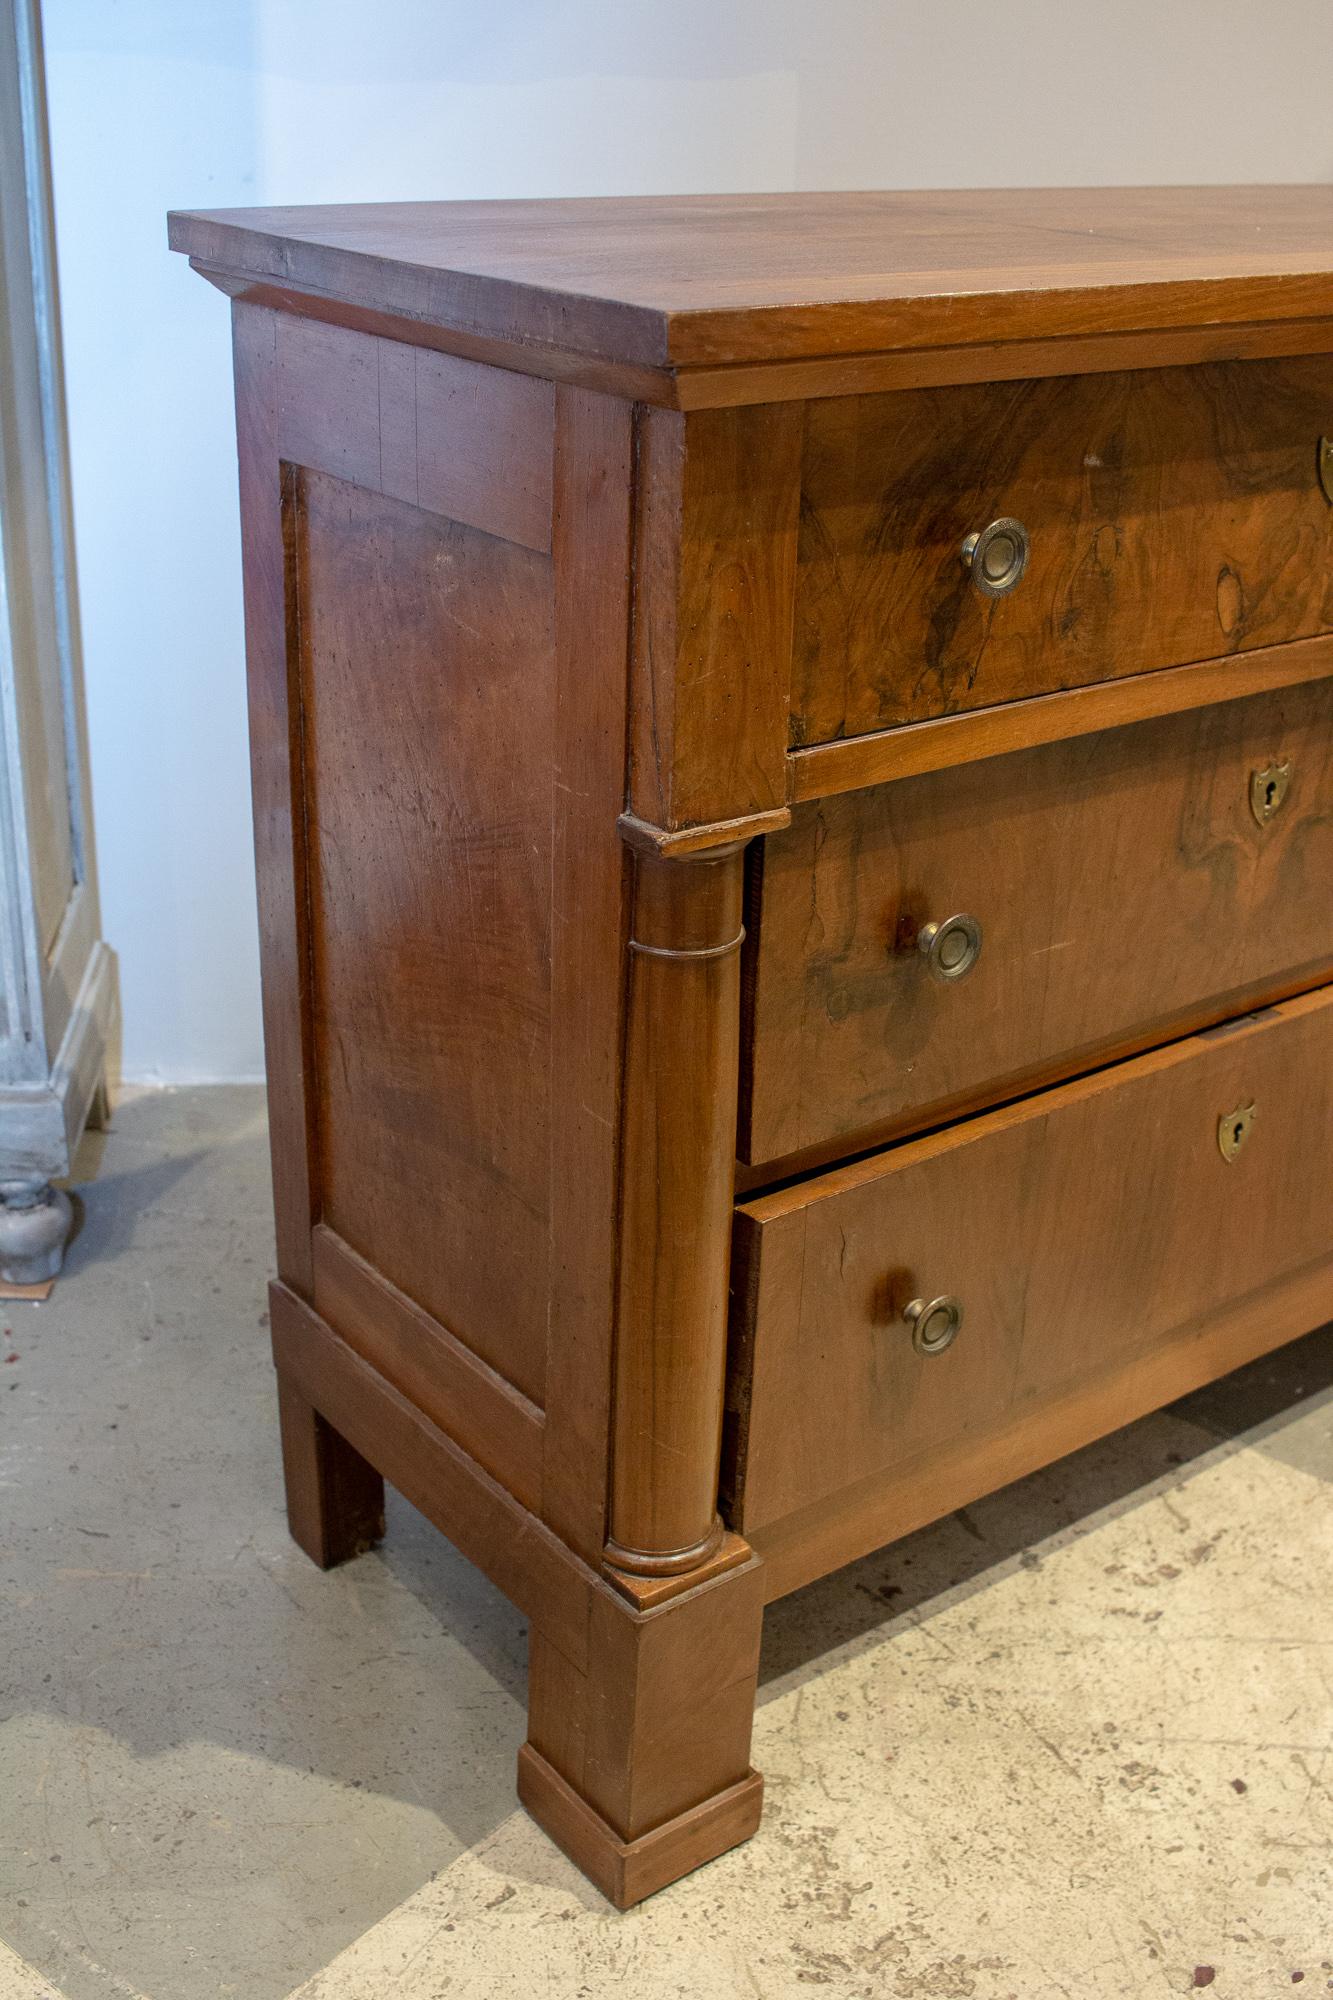 Late 19th-Early 20th Century French Empire Chest of Drawers Found in Belgium (Messing)